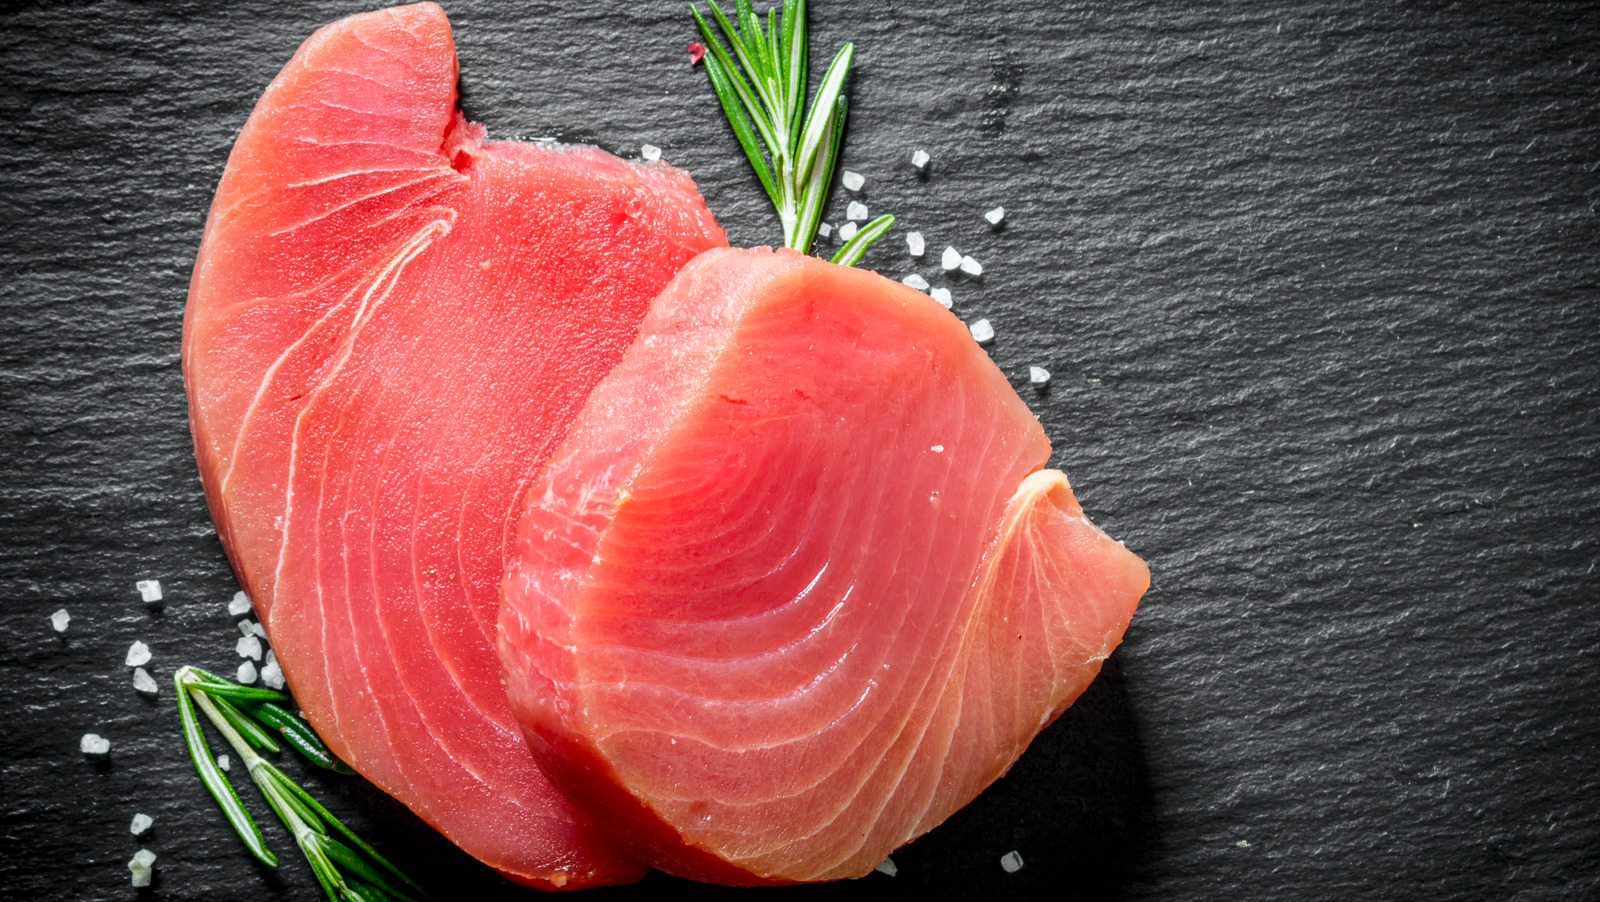 What You Should Know About The Tuna Diet